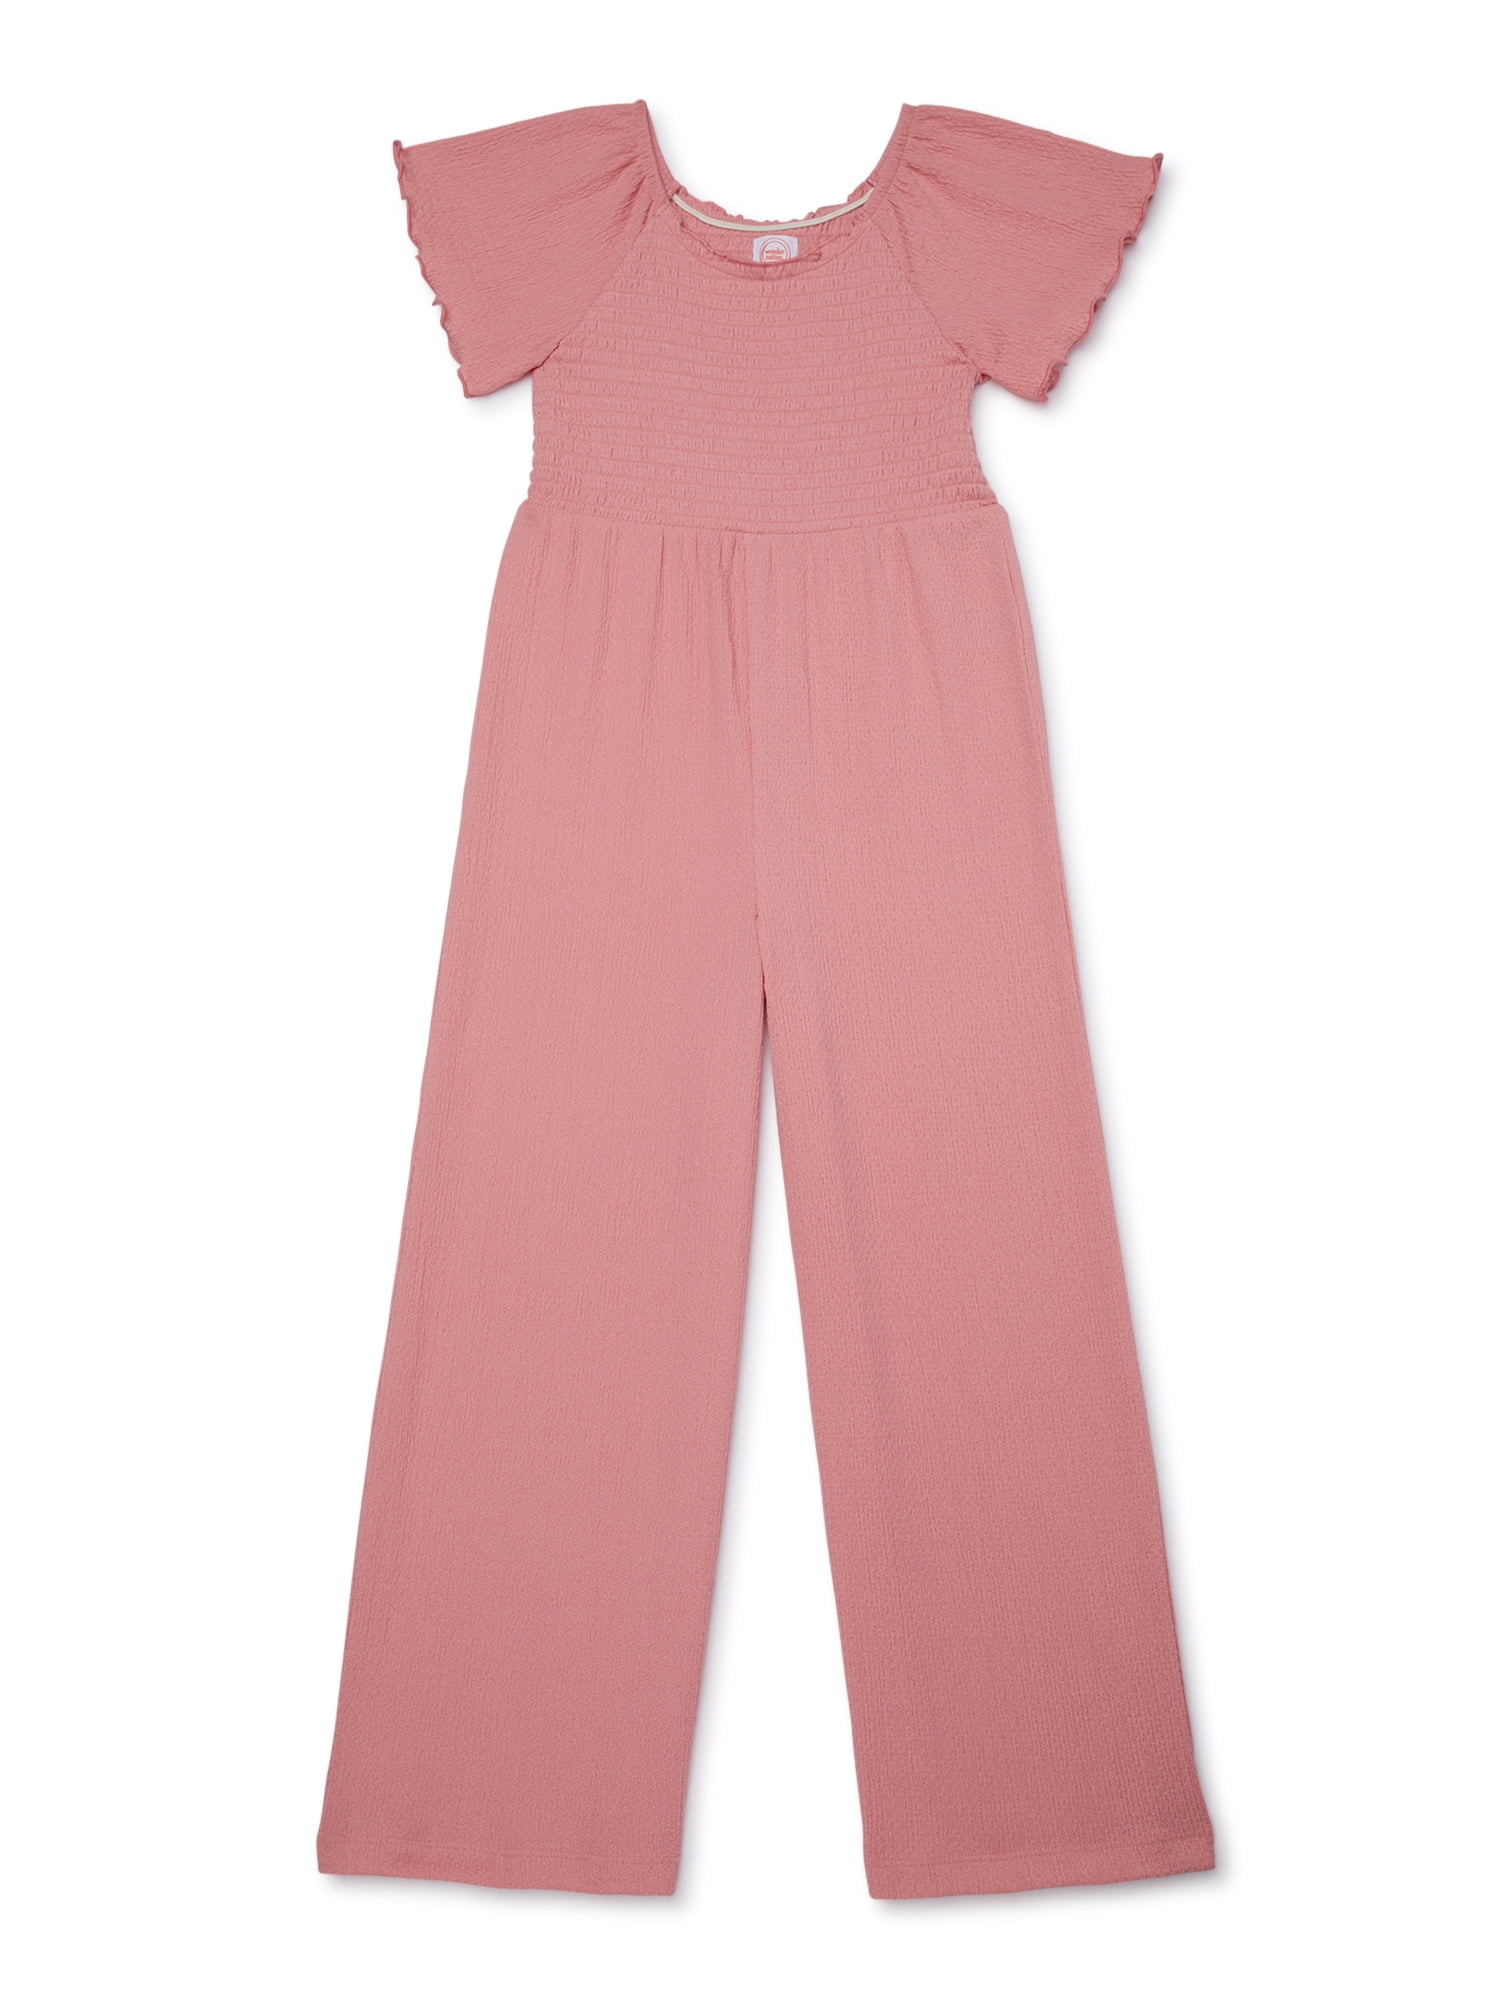 girls rompers & jumpsuits | abercrombie kids